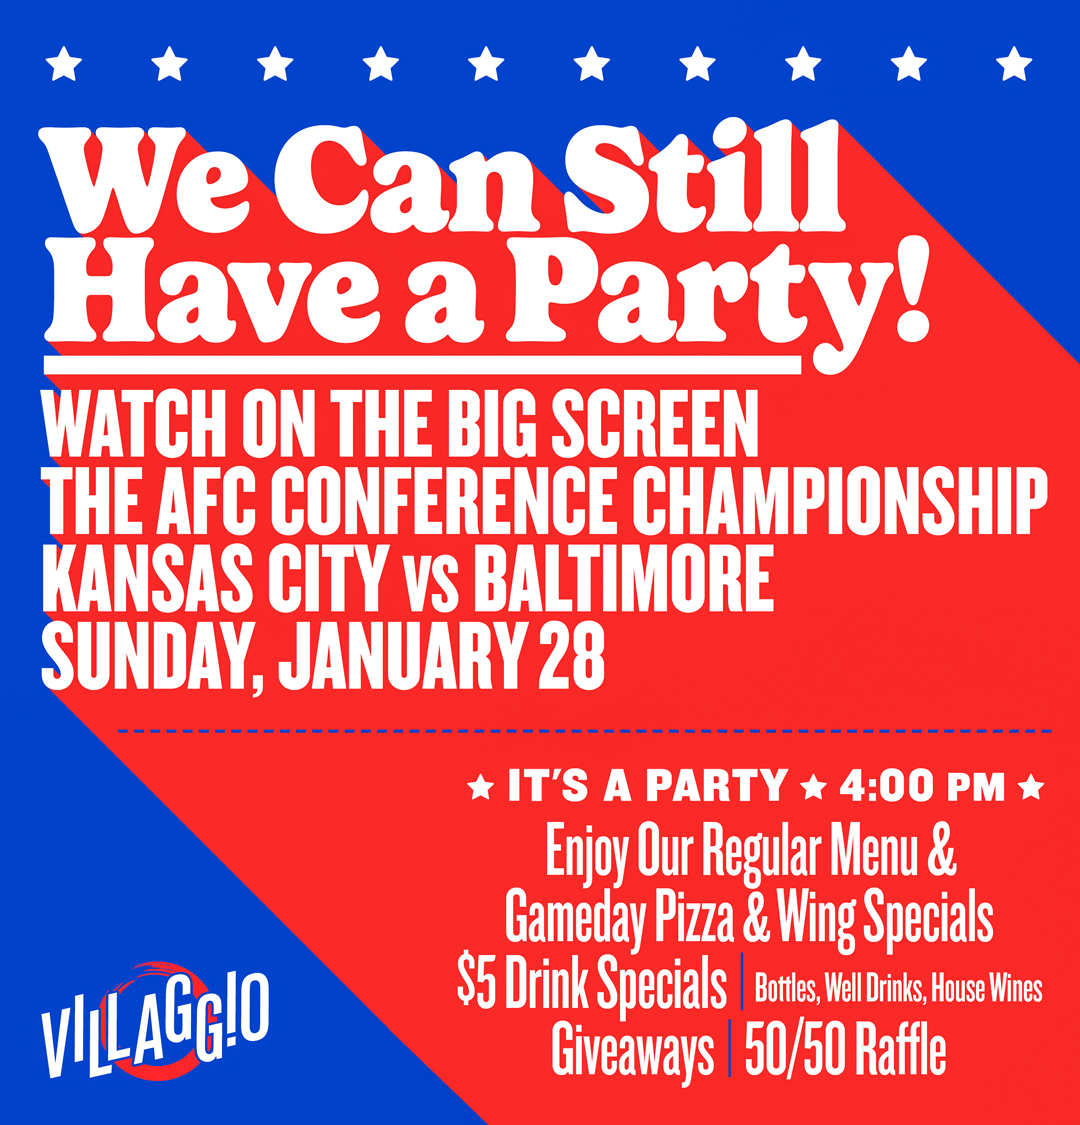 We Can Still Have a Party! Watch the AFC Championship Game on the Big Screen.